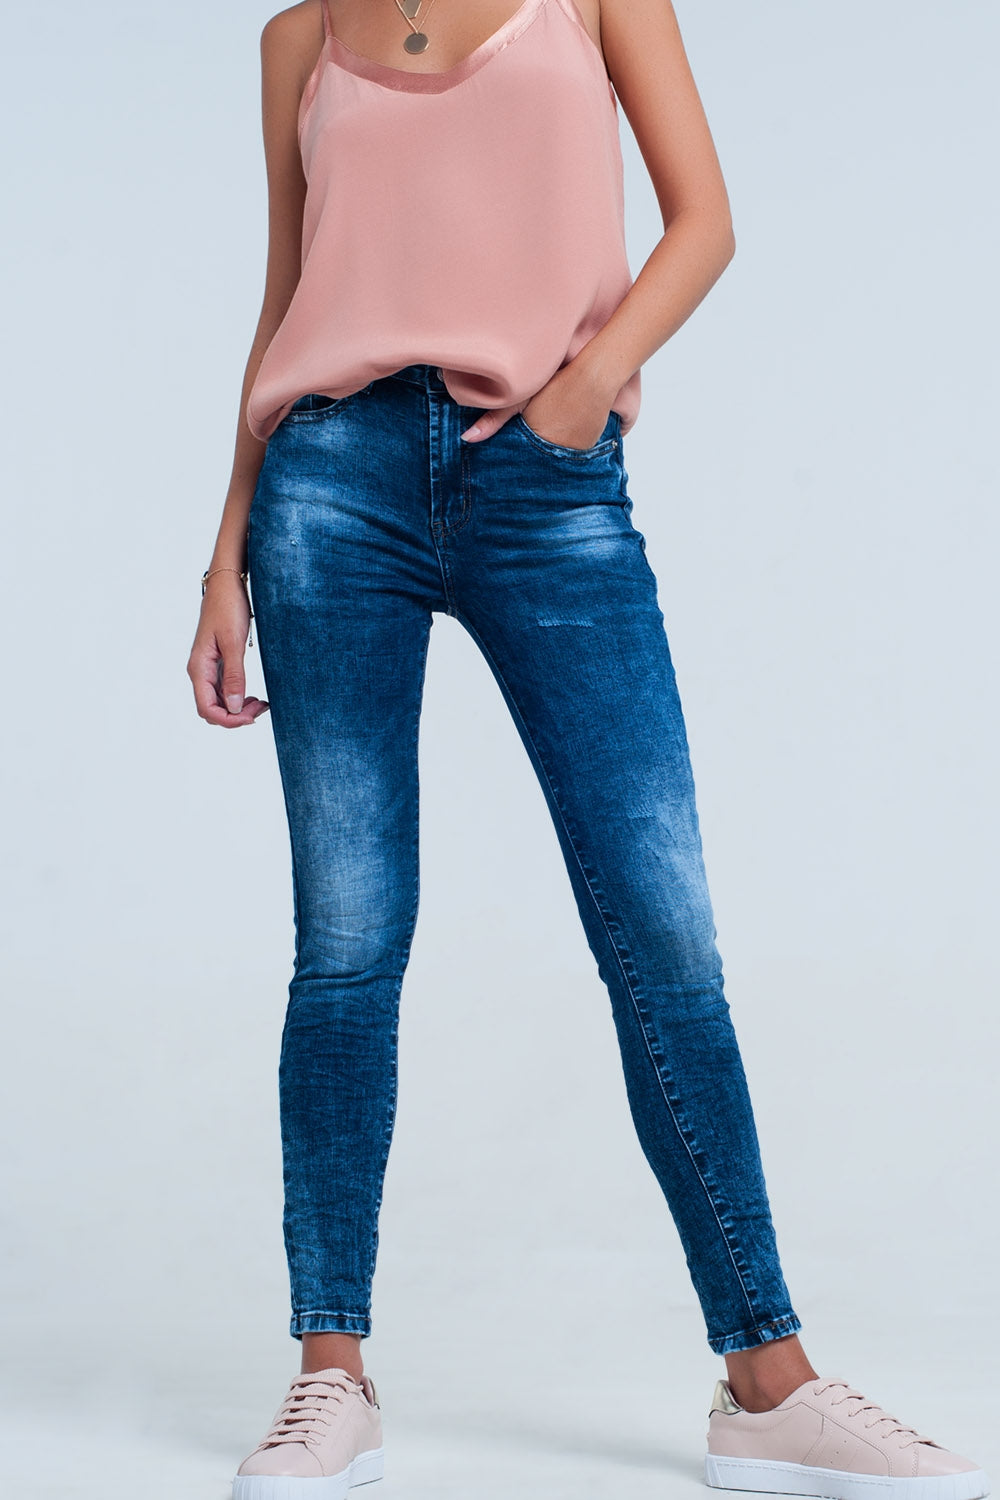 Q2 high waist skinny jeans in bright blue wash